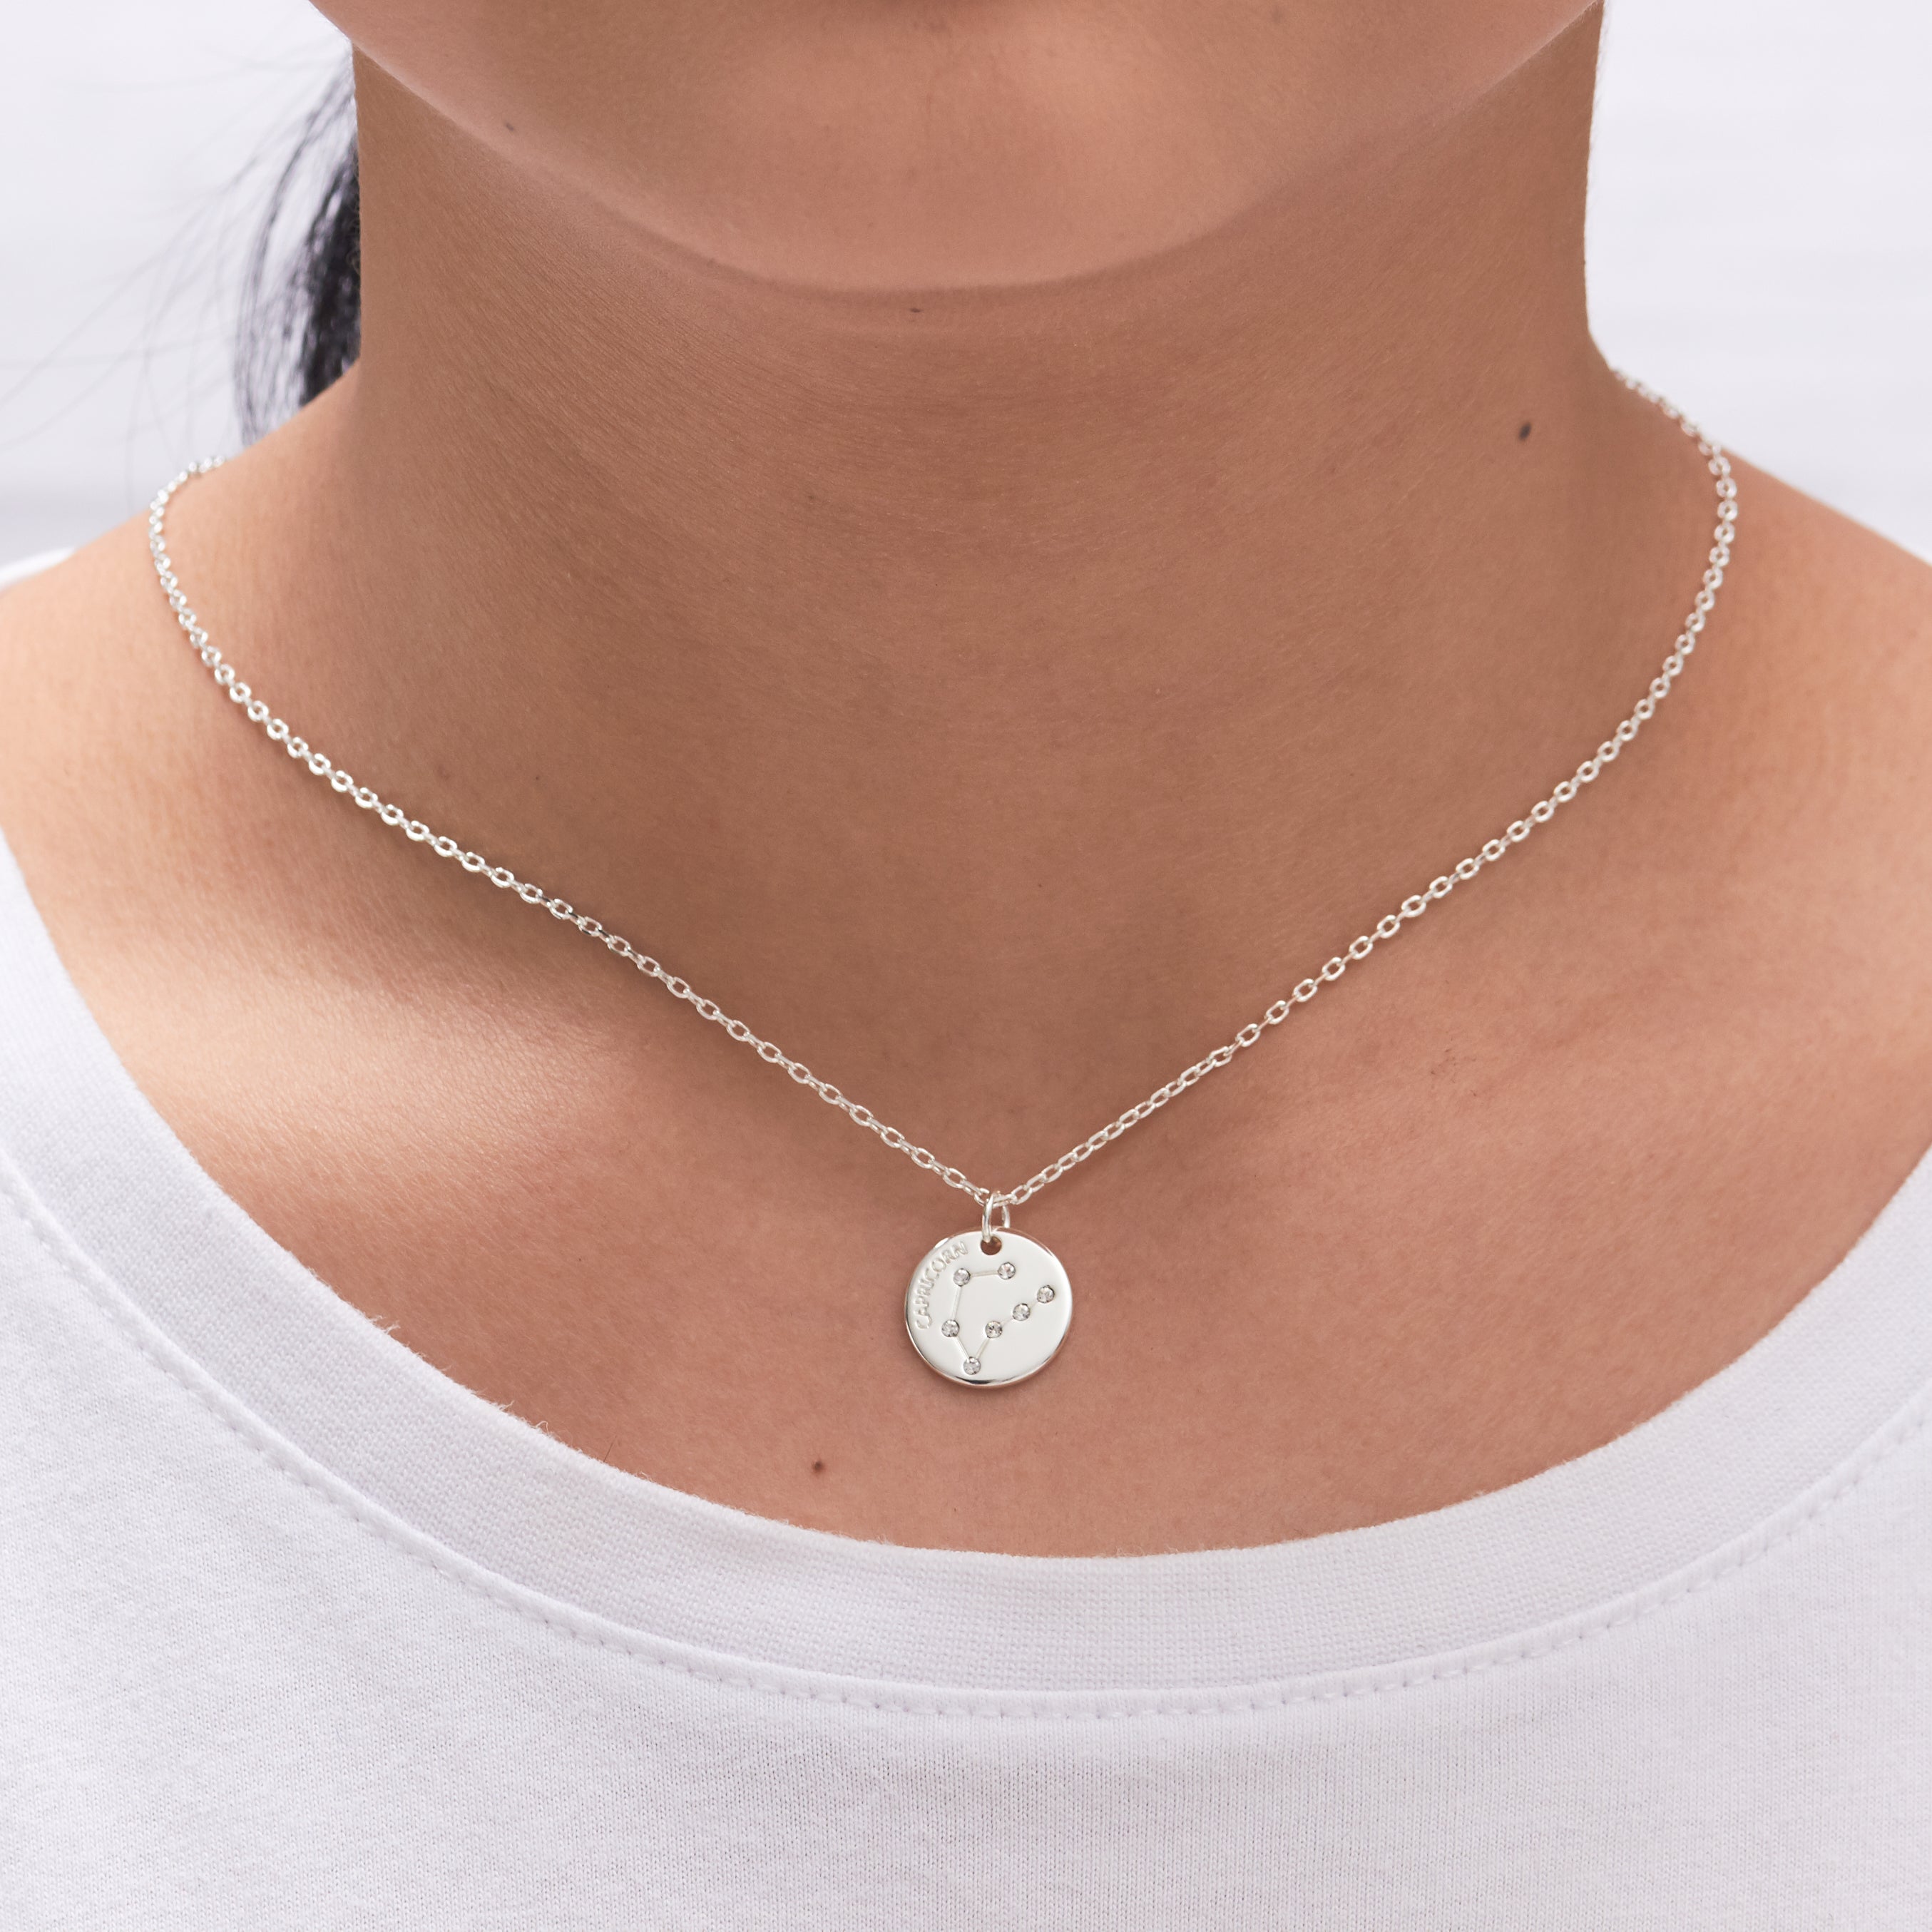 Capricorn Zodiac Star Sign Disc Necklace Created with Zircondia® Crystals